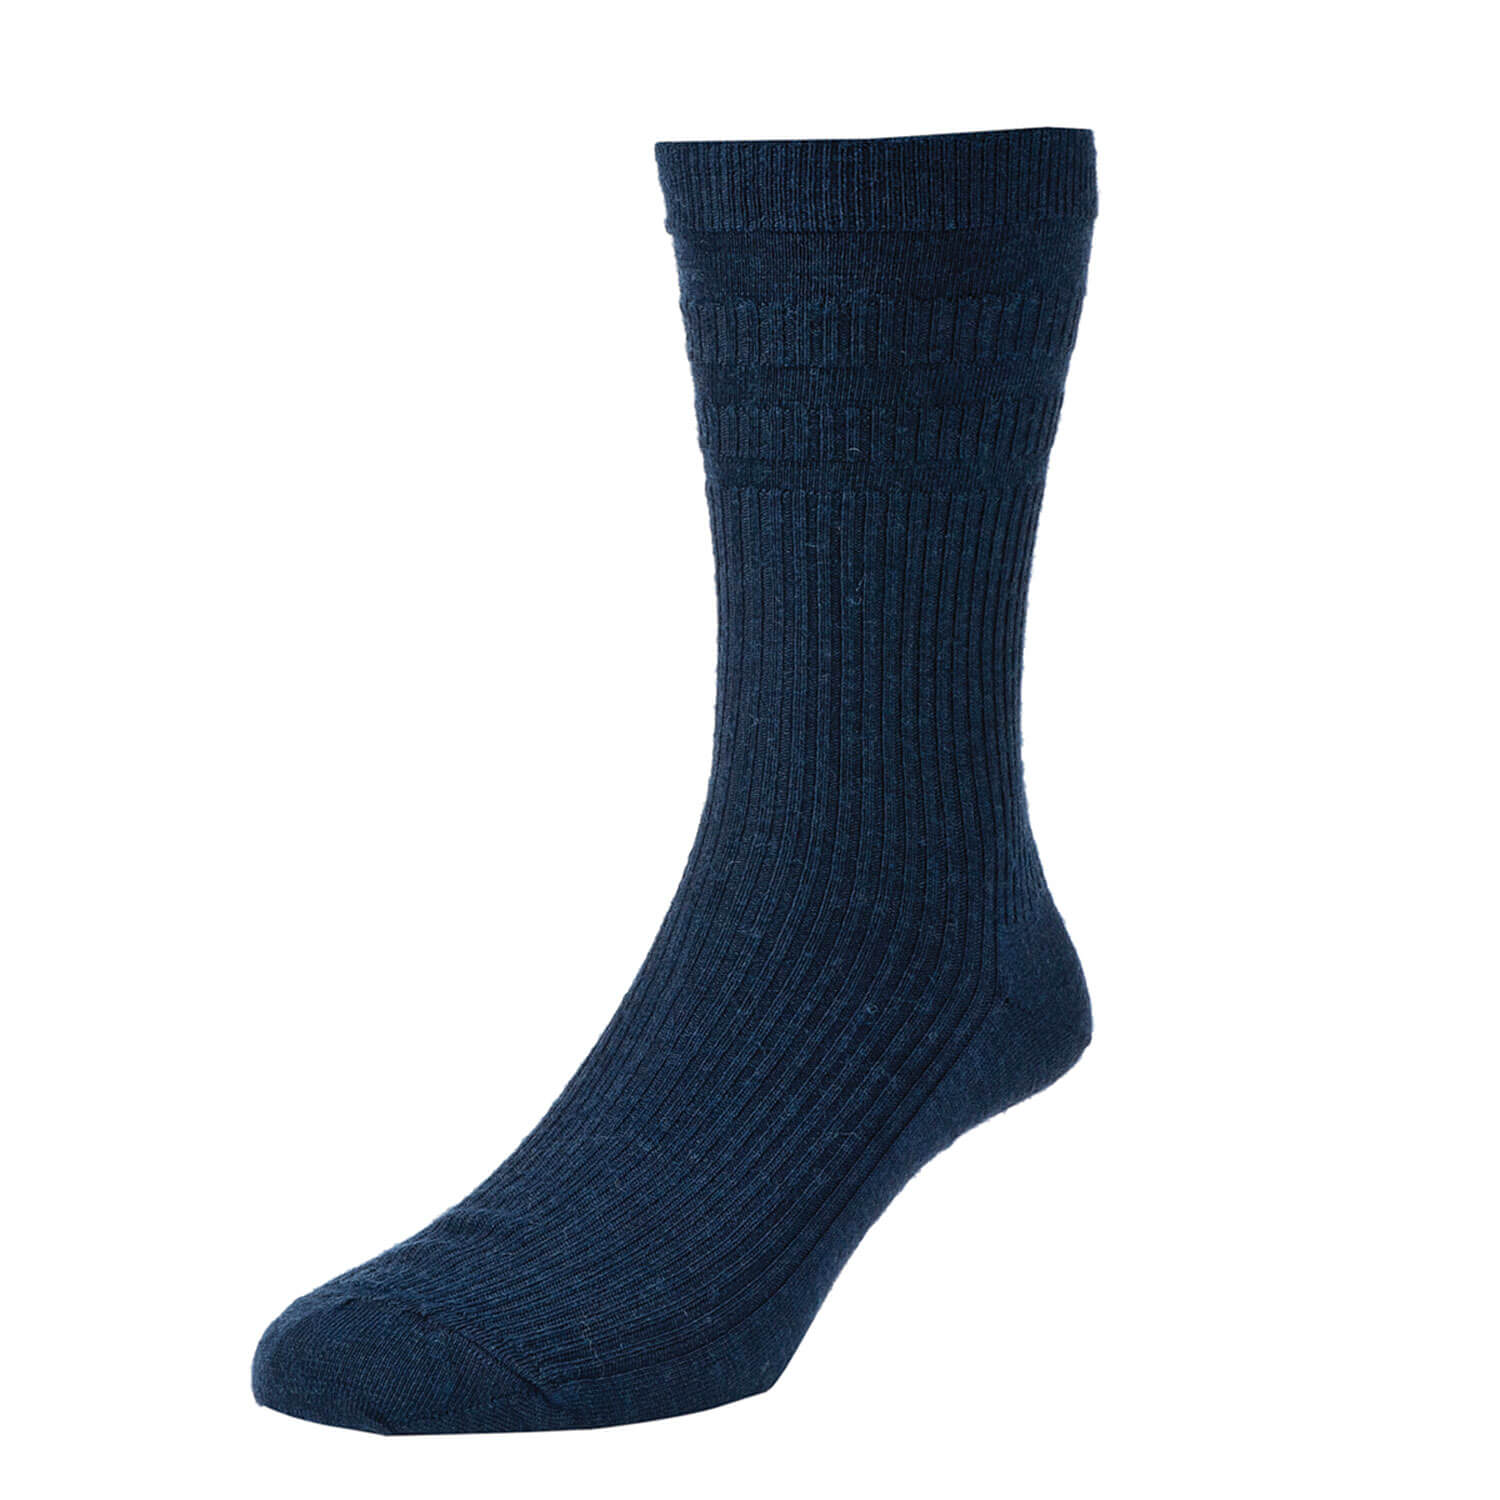 Hj Hall Softop Botany Wool Rich Diabetic Socks - Navy 1 Shaws Department Stores